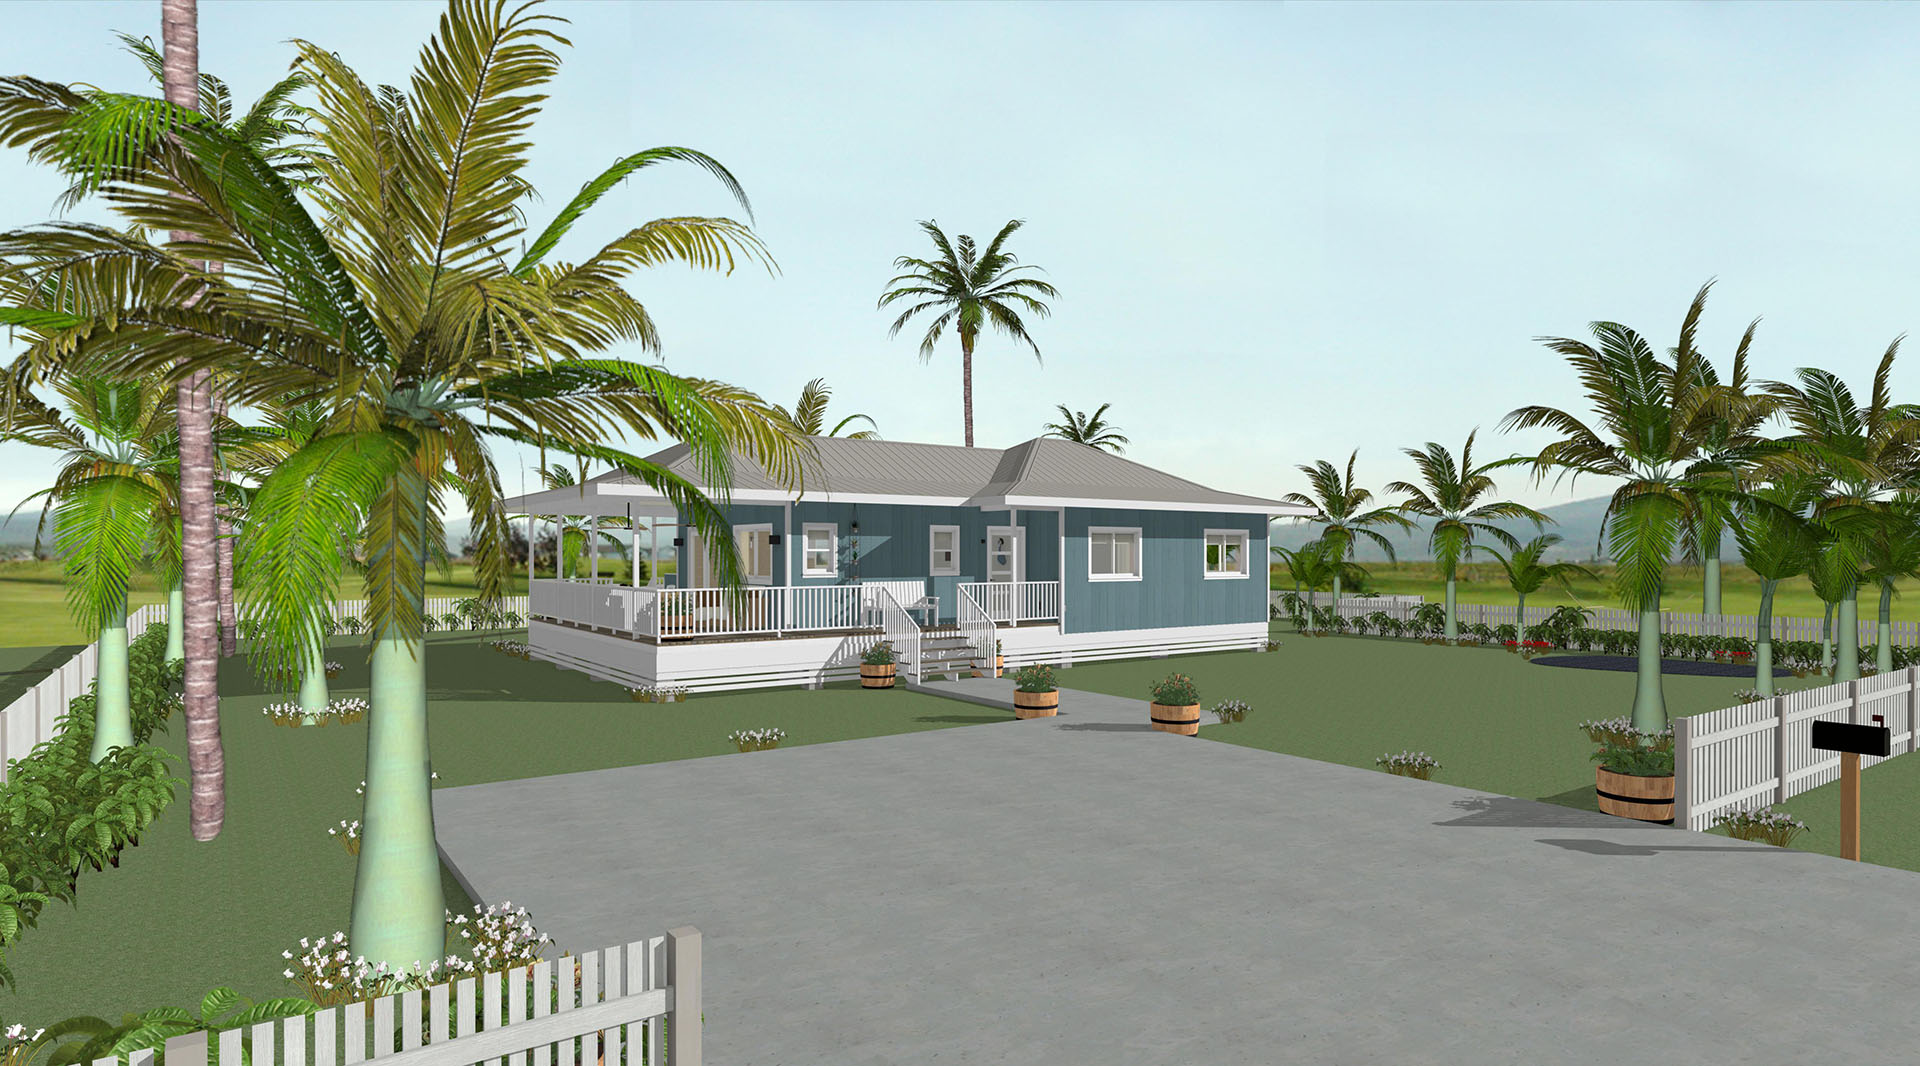 The far away front view of a blue house with a grey roof, wooden deck, and palm trees